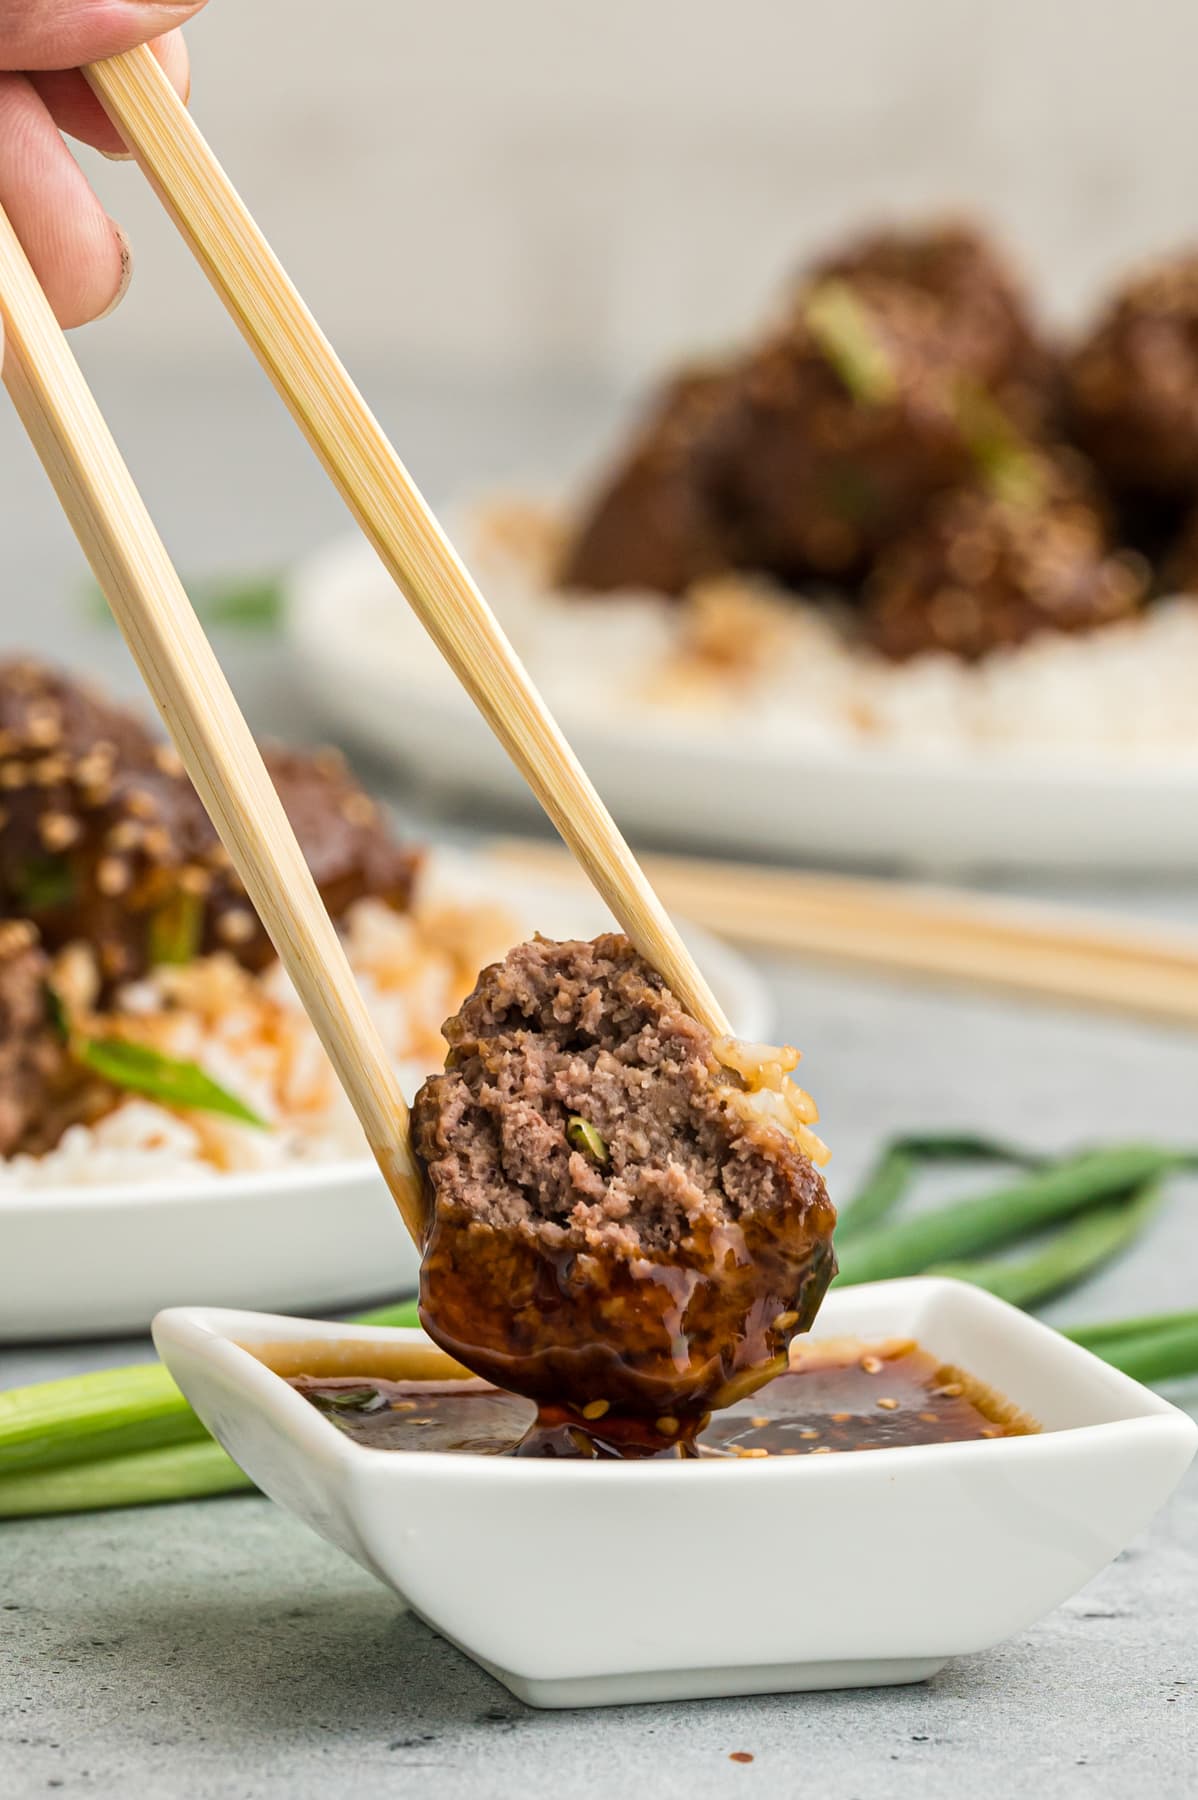 A meatball between two chopsticks being dipped into teriyaki sauce